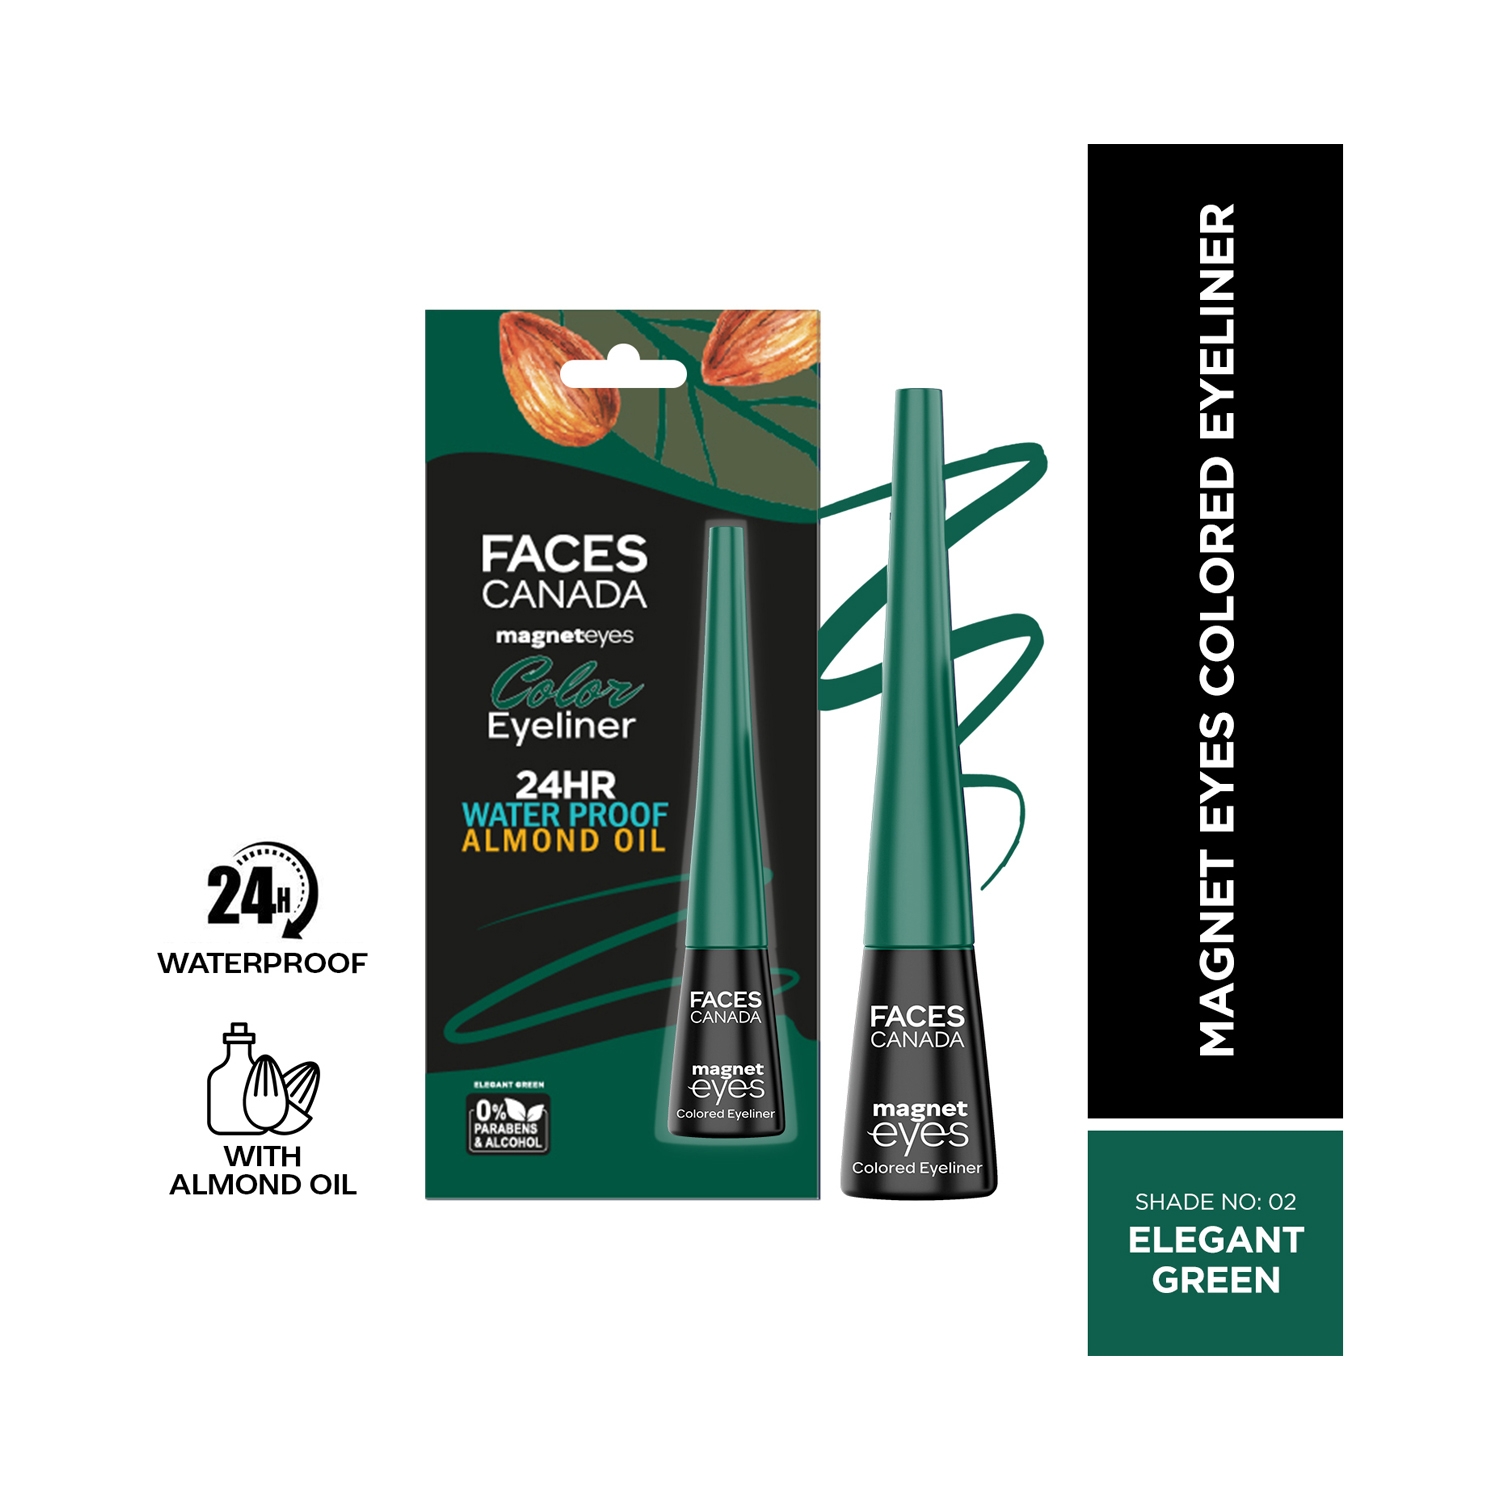 Faces Canada | Faces Canada Magneteyes Colored Eyeliner - 02 Elegant Green (4ml)